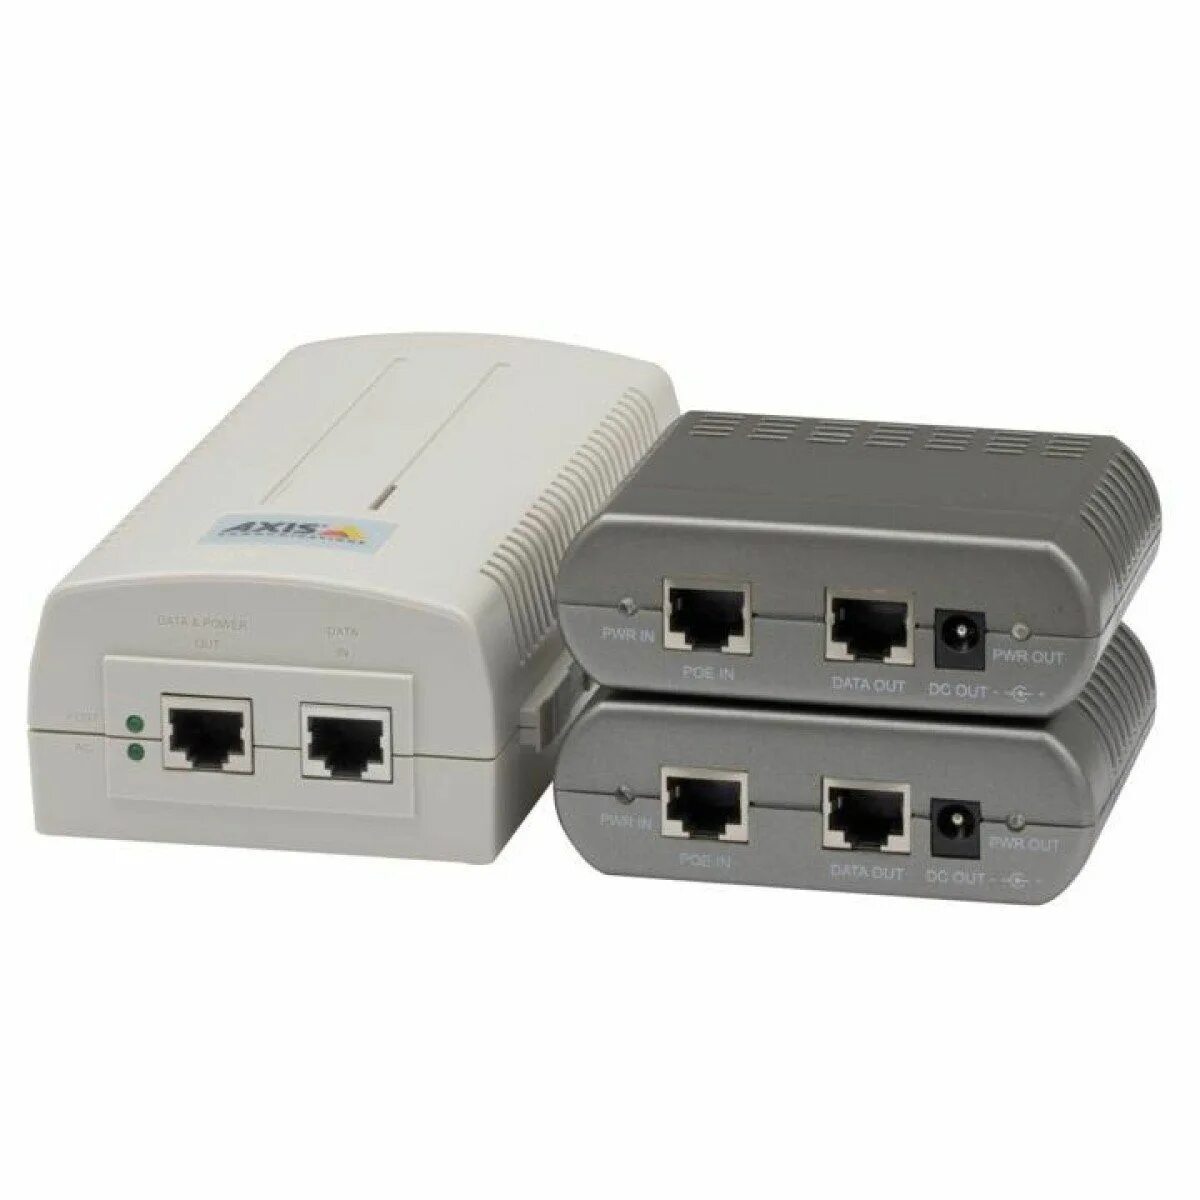 Poe 1 порт. Axis t8123 High POE Midspan. Axis t8124 High POE 60w Midspan 1-Port. Axis t8123 High POE 30w. Инжектор POE Axis t8120 Midspan 1-Port 5026-202.